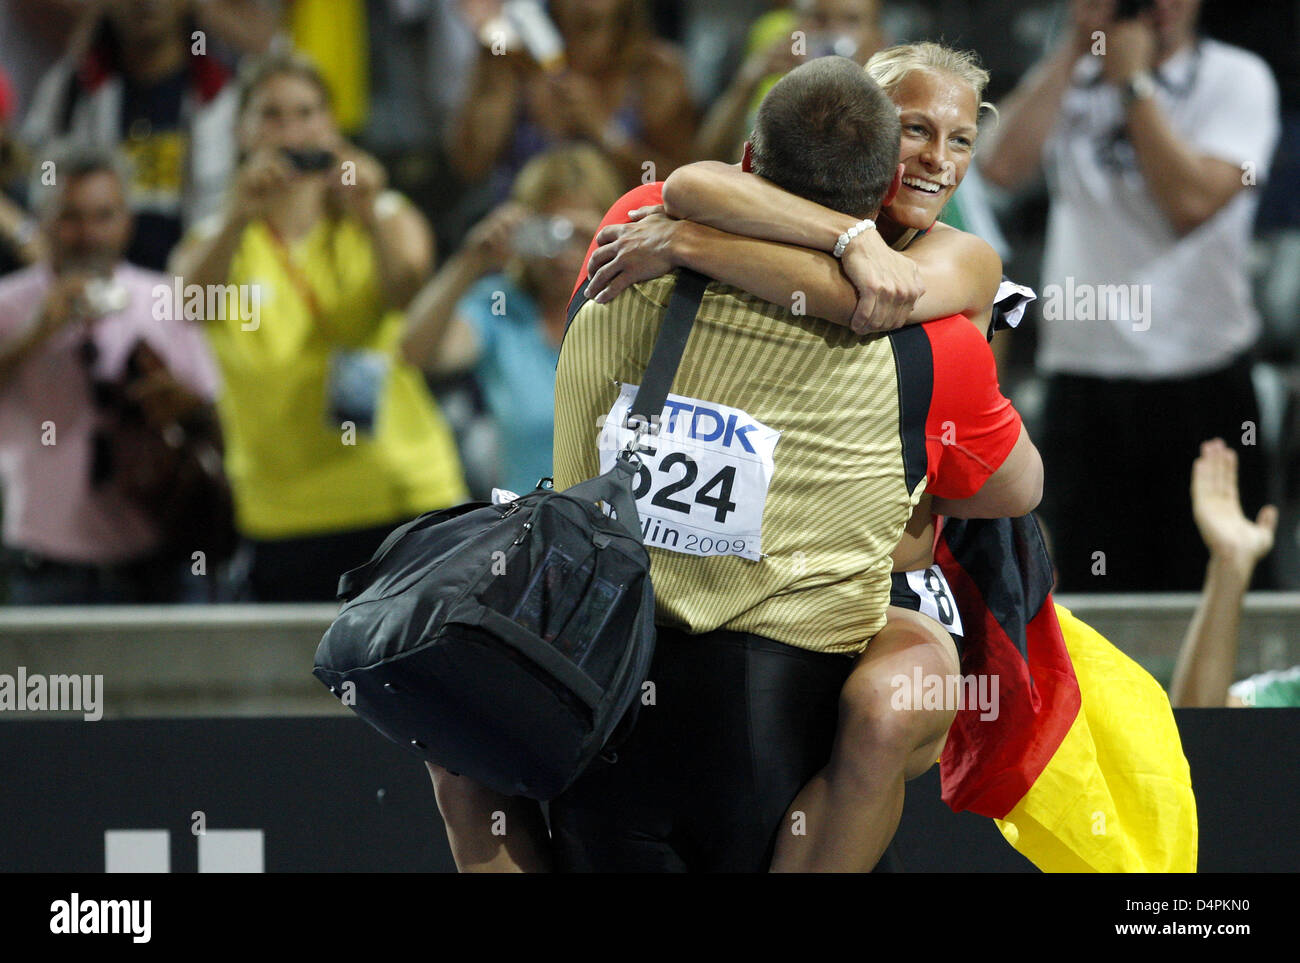 German Ralf Bartels celebrates with German heptathlete Jennifer Oeser after winning the bronze medal in the shot put final at the 12th IAAF World Championships in Athletics in Berlin, Germany, 15 August 2009. Photo: KAY NIETFELD Stock Photo